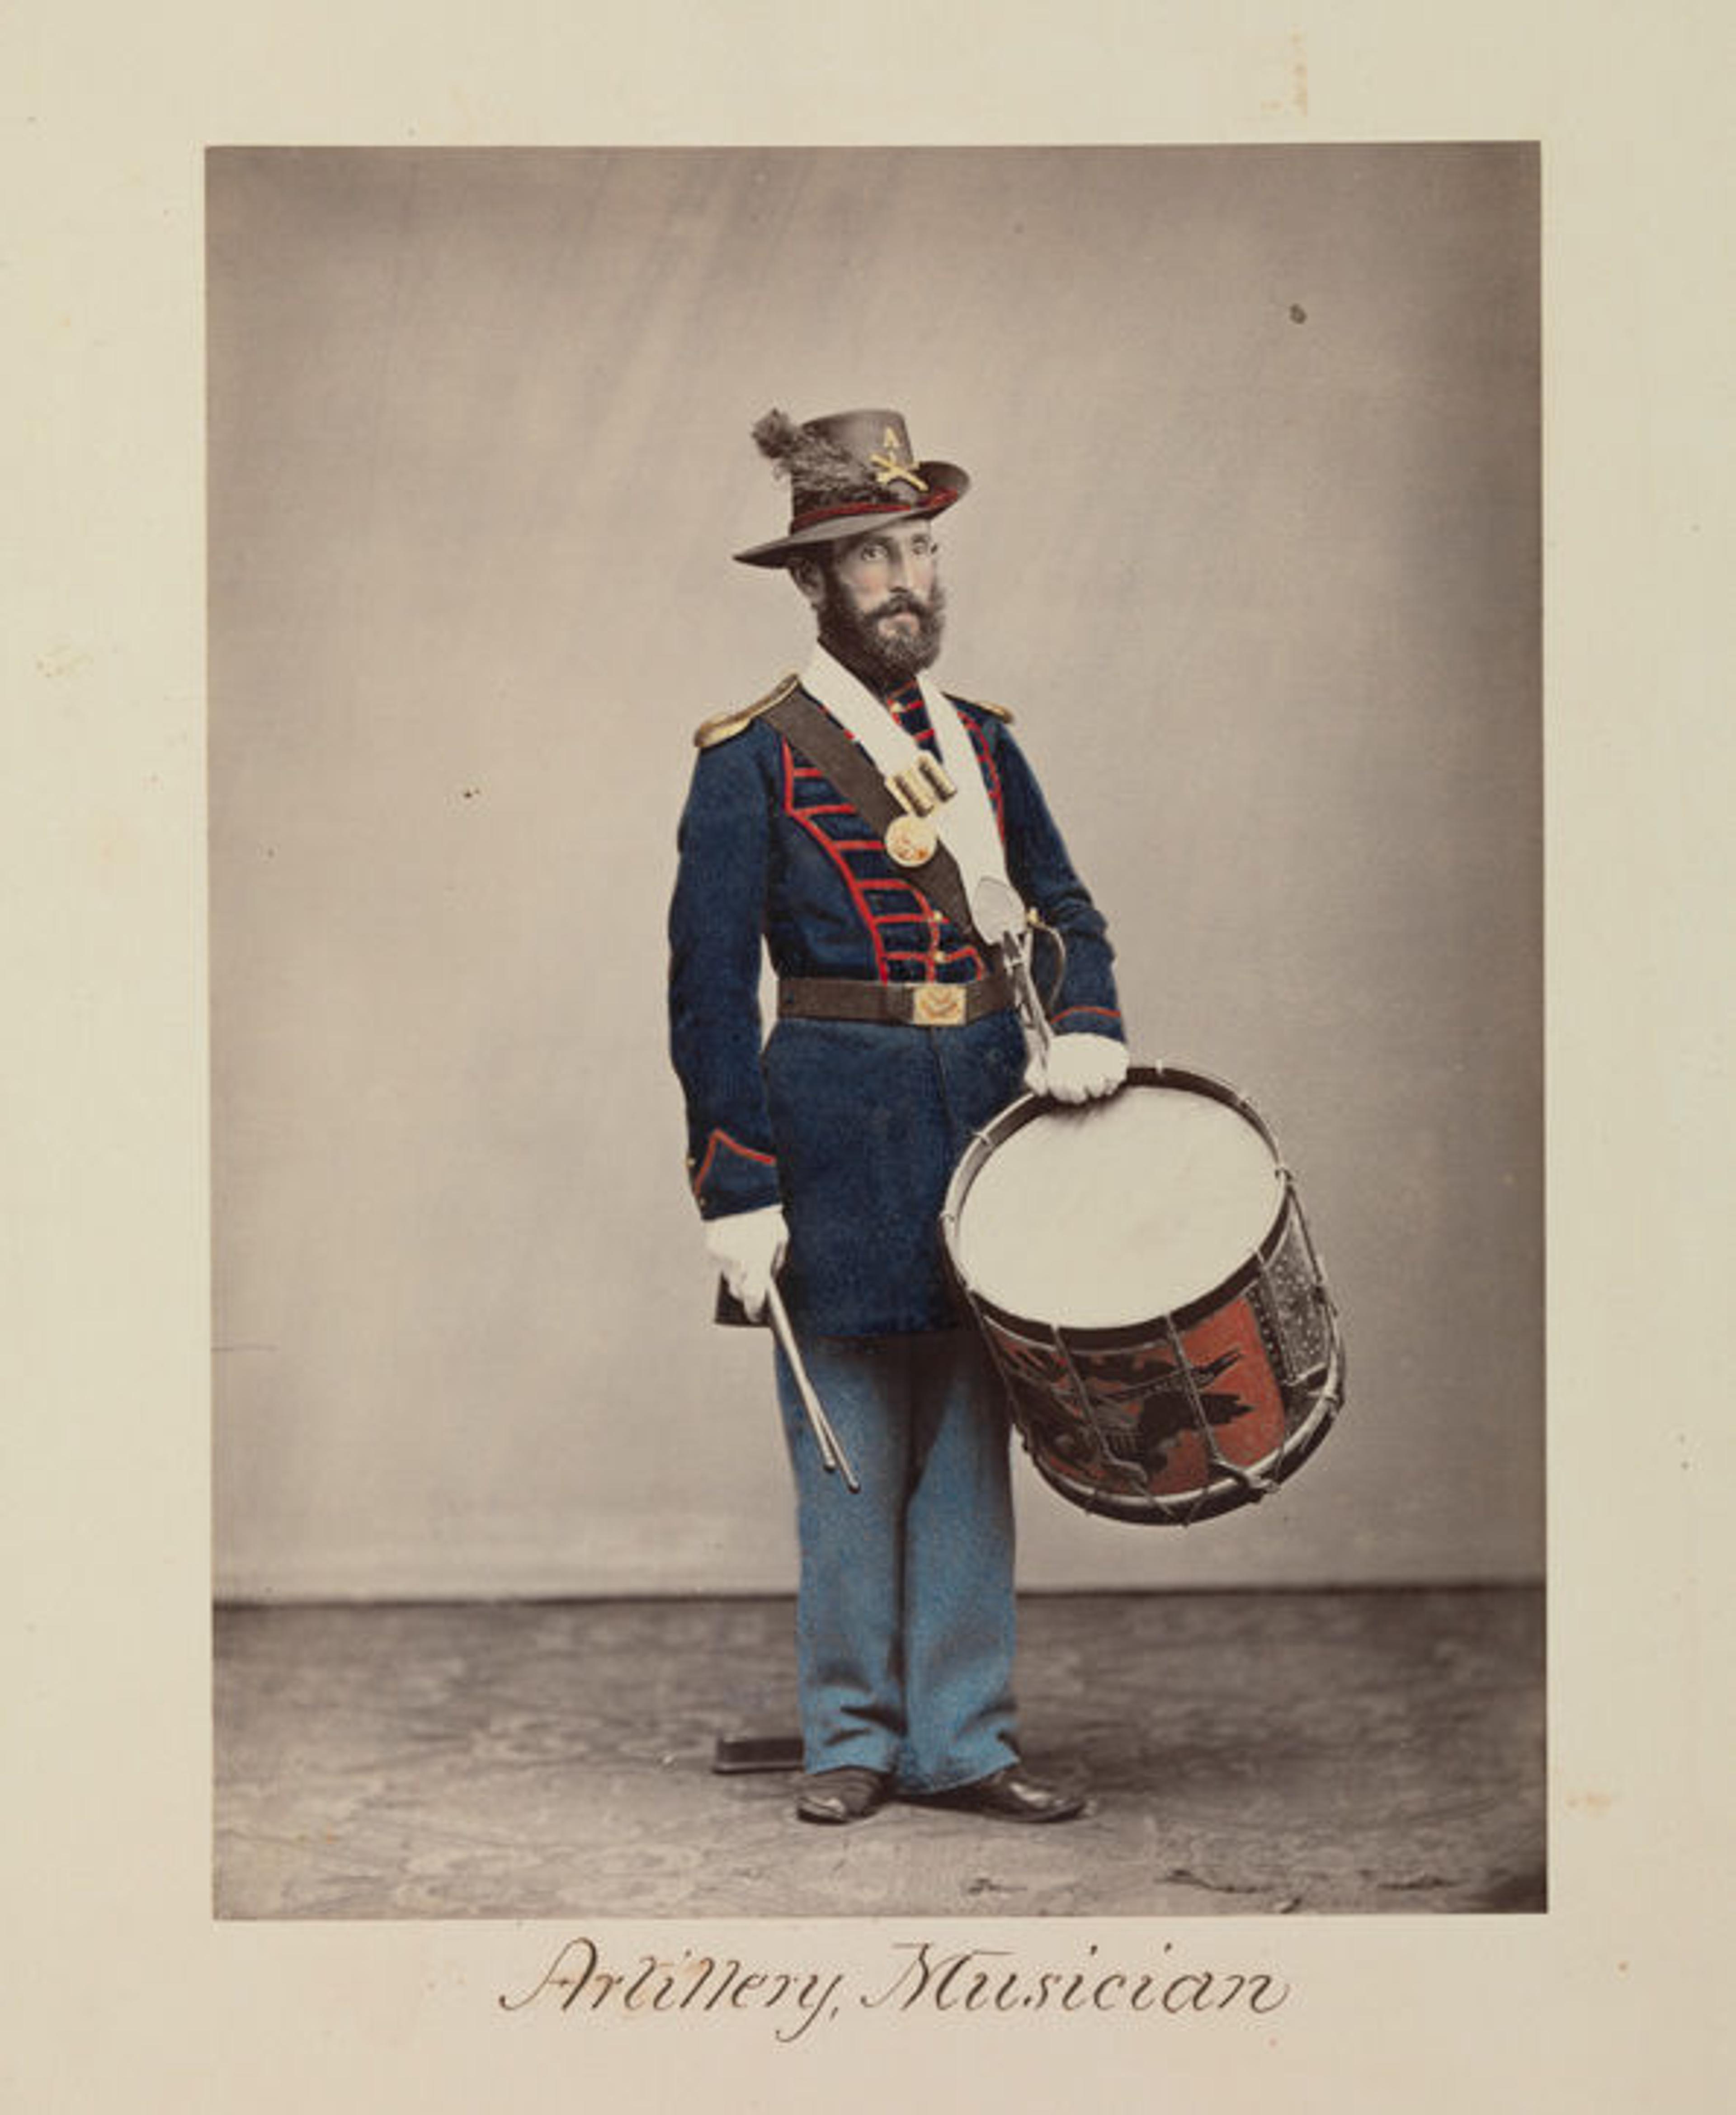 Attributed to Oliver H. Willard (American, active 1850s–70s, died 1875). Artillery, Musician, 1866